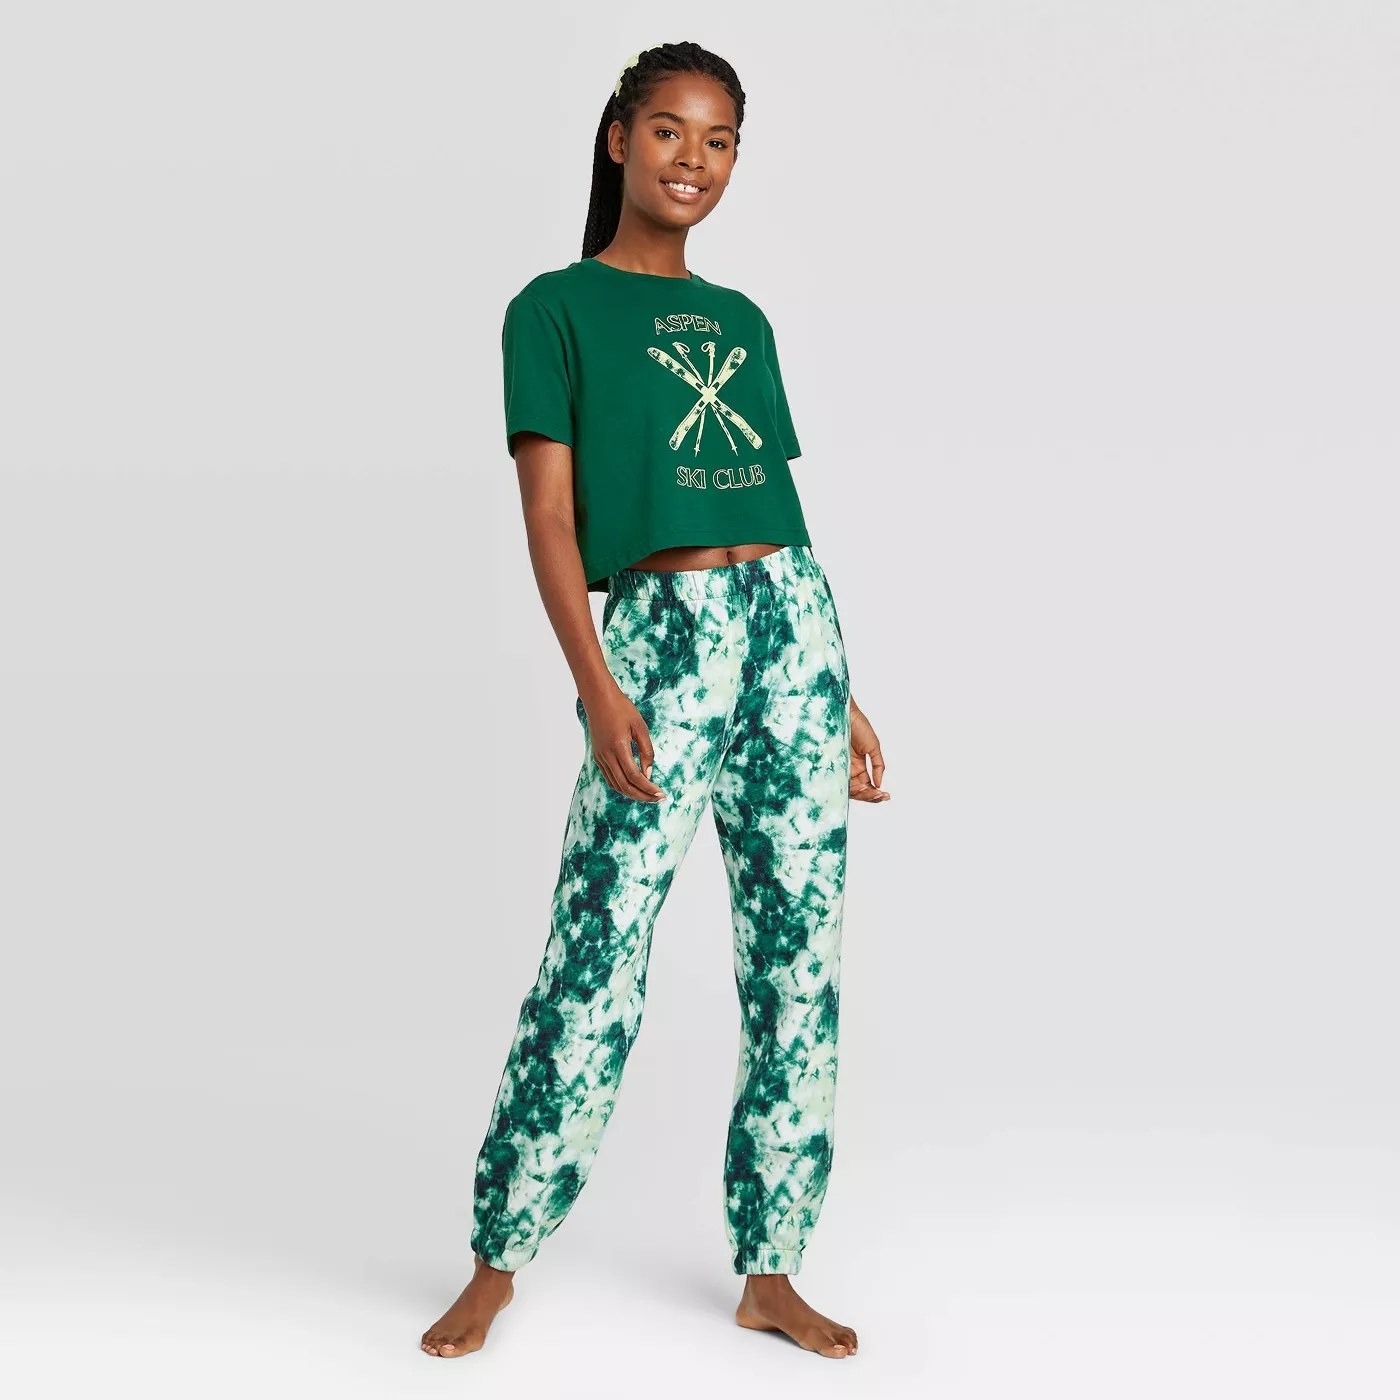 A model wearing the fleece joggers, the shirt, and the scrunchie in green